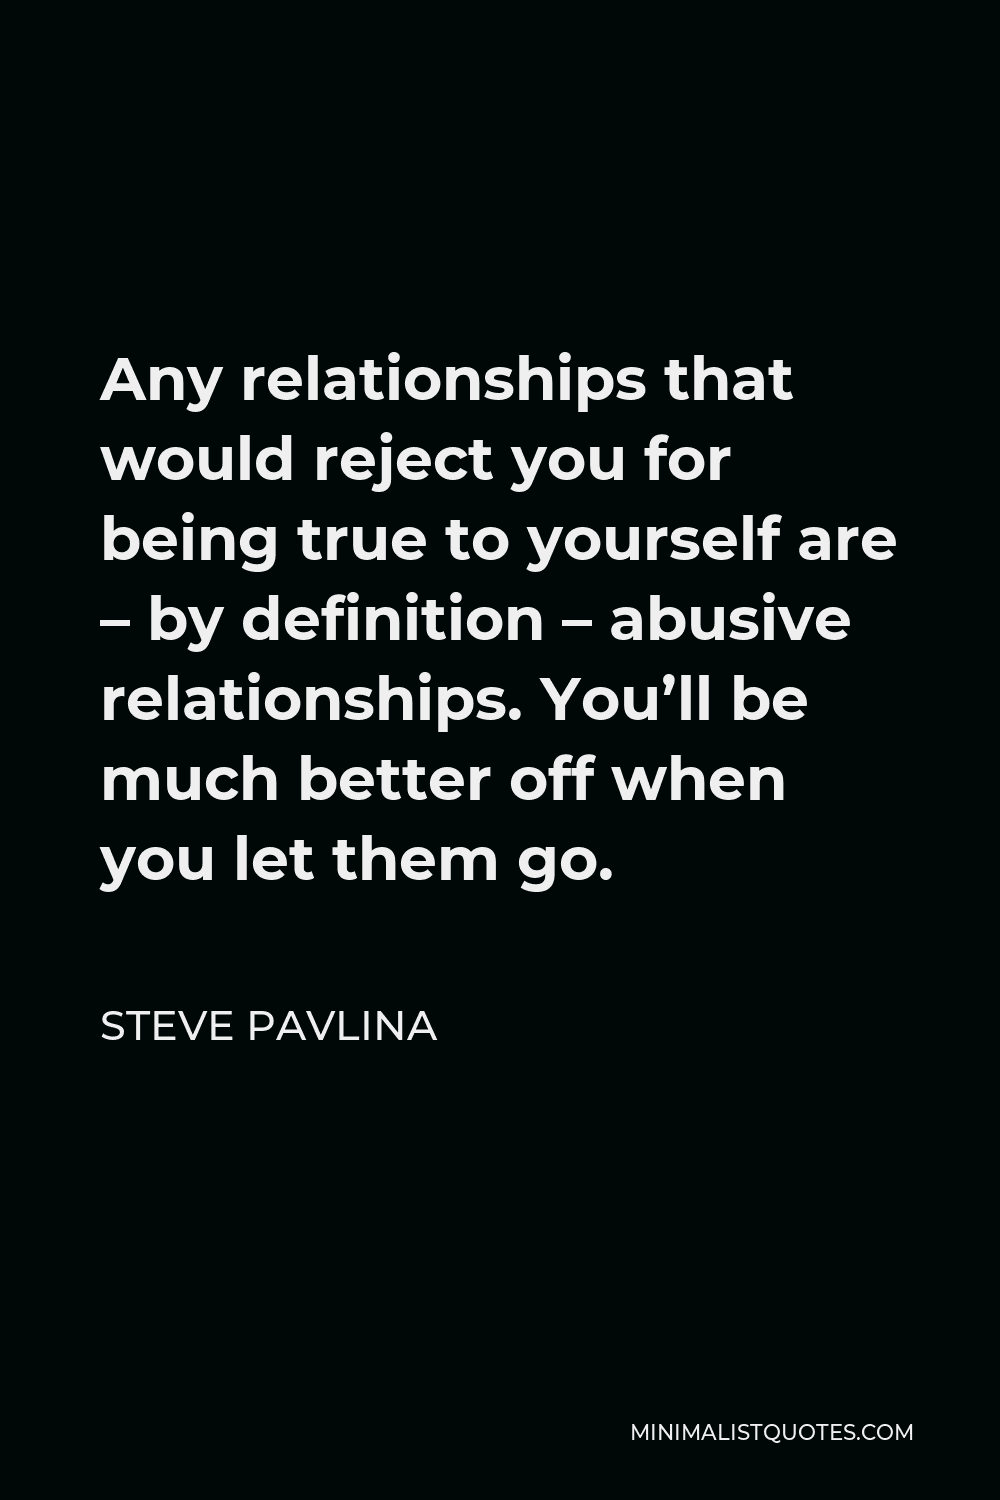 Steve Pavlina Quote - Any relationships that would reject you for being true to yourself are – by definition – abusive relationships. You’ll be much better off when you let them go.